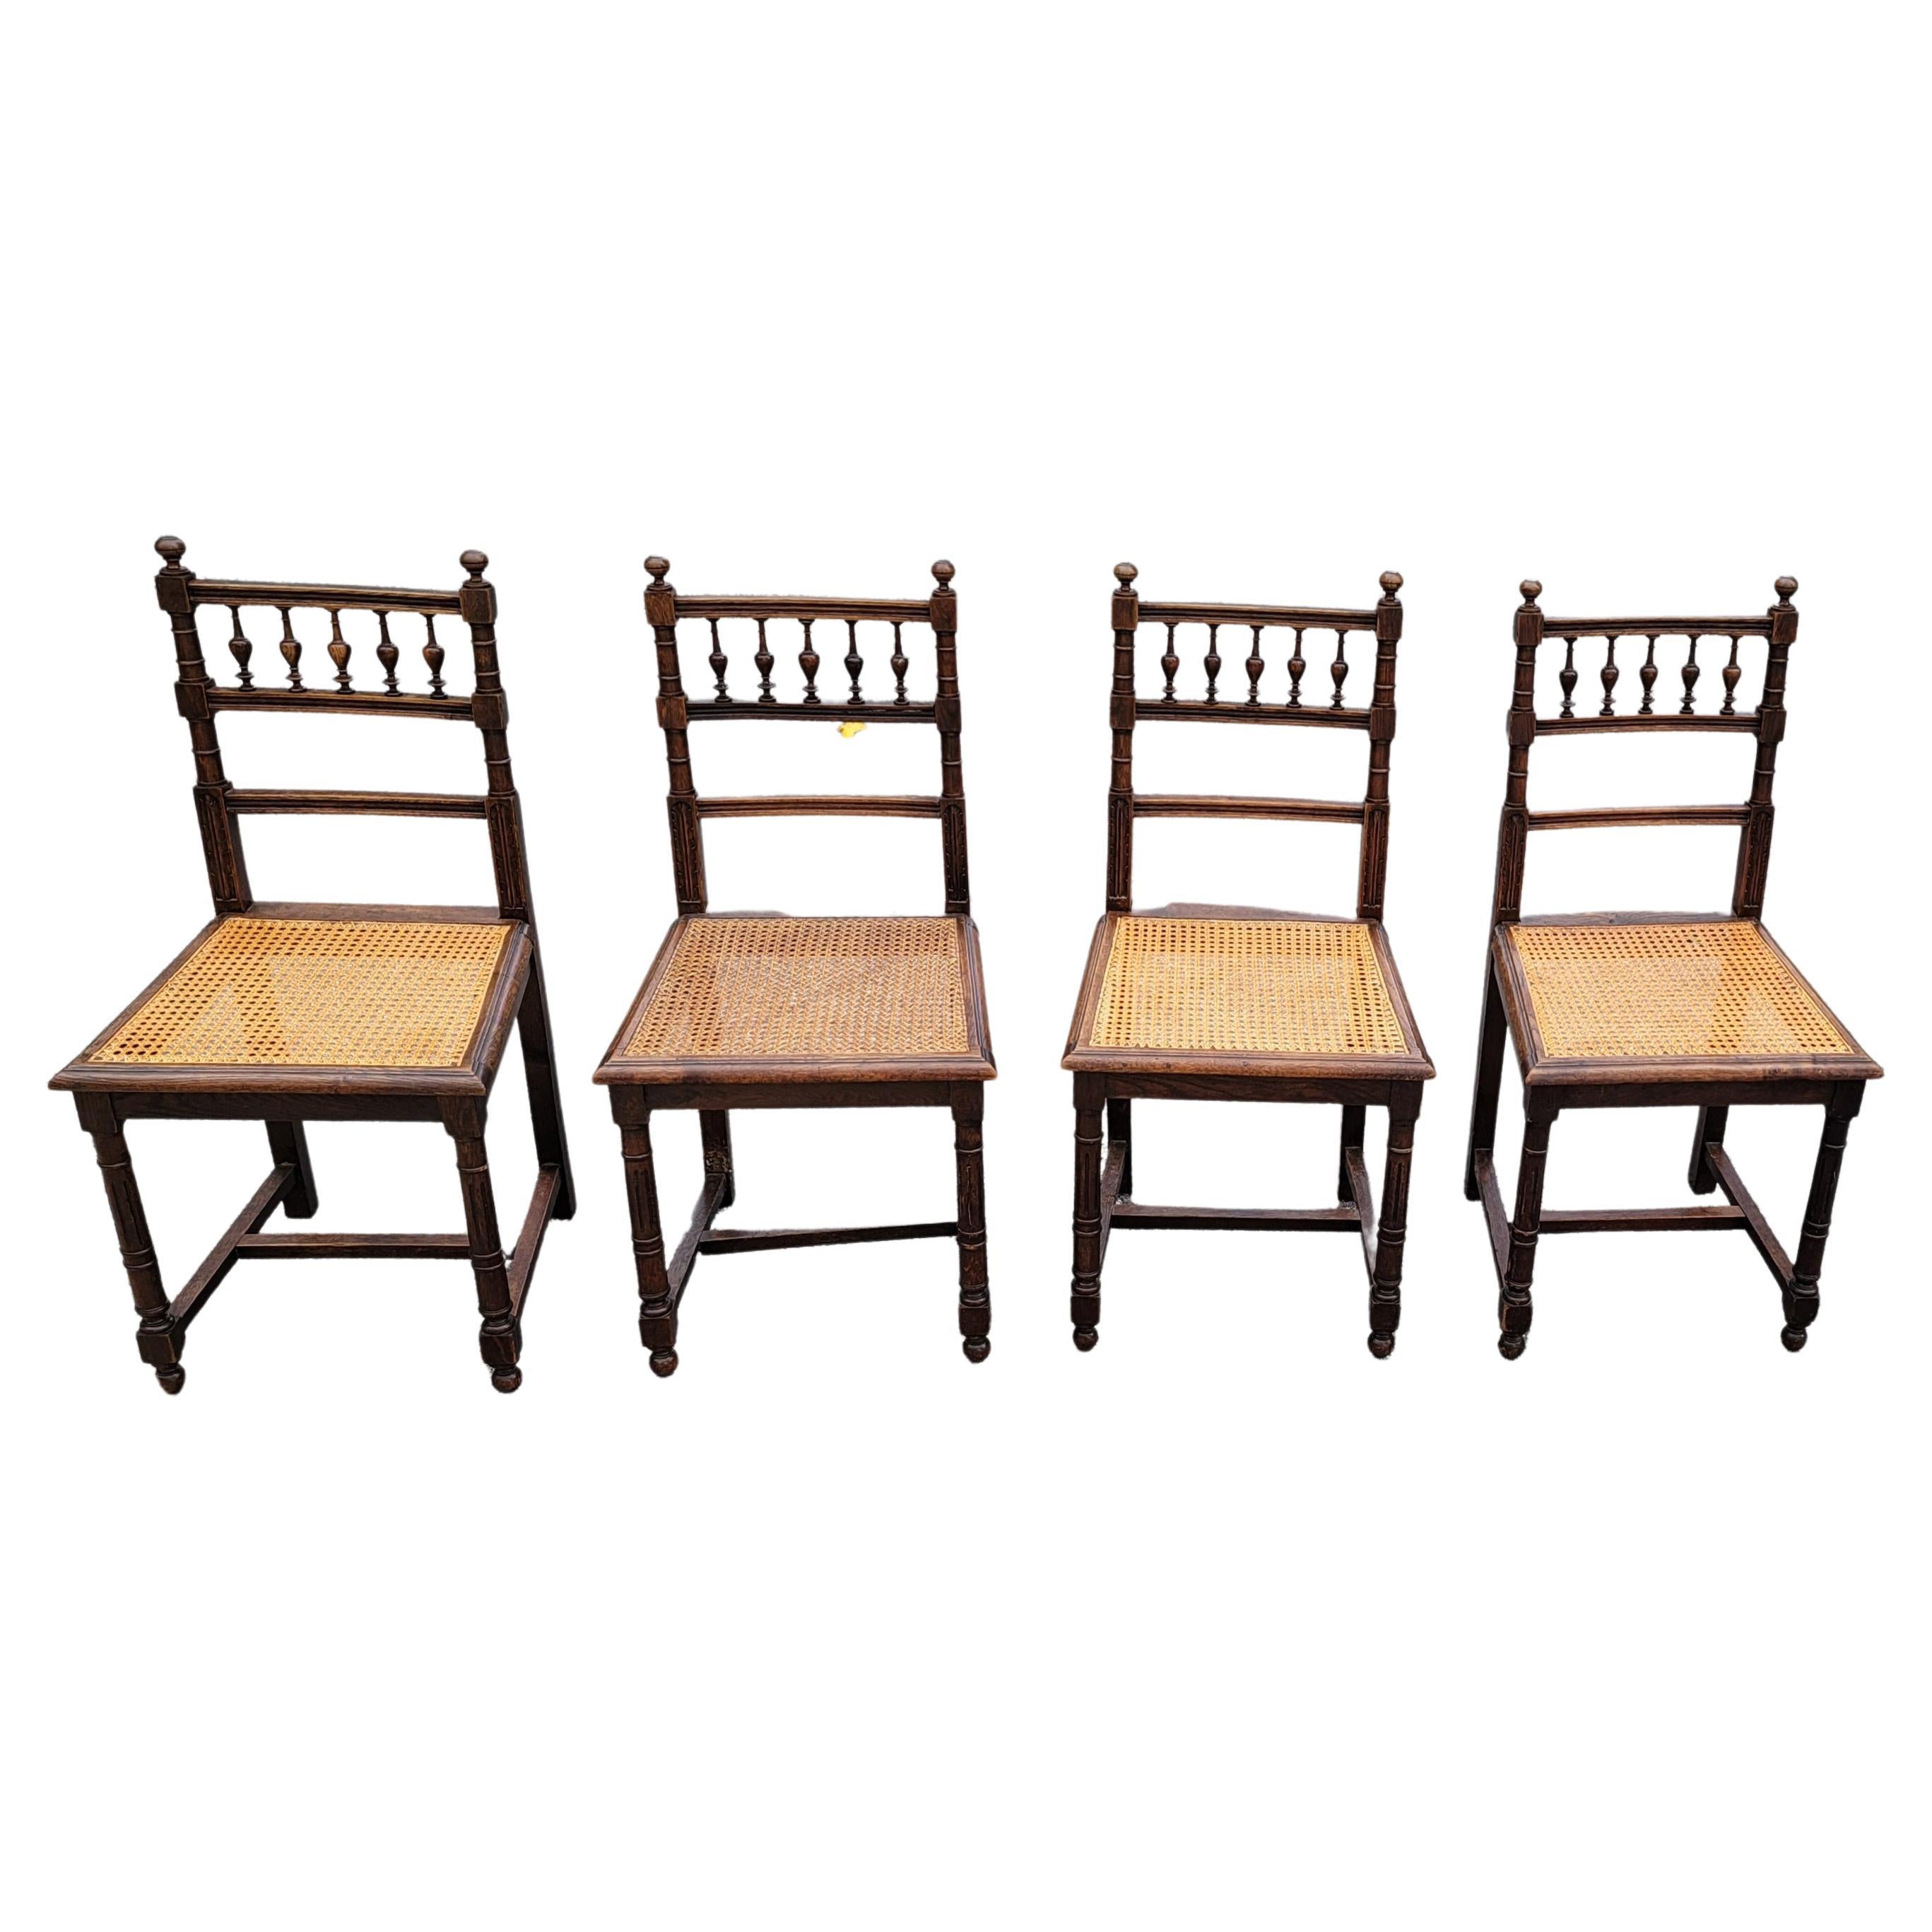 Cane Set of 5 Early 20th C. French Henry II Oak and Canned Seat Dining Chairs For Sale